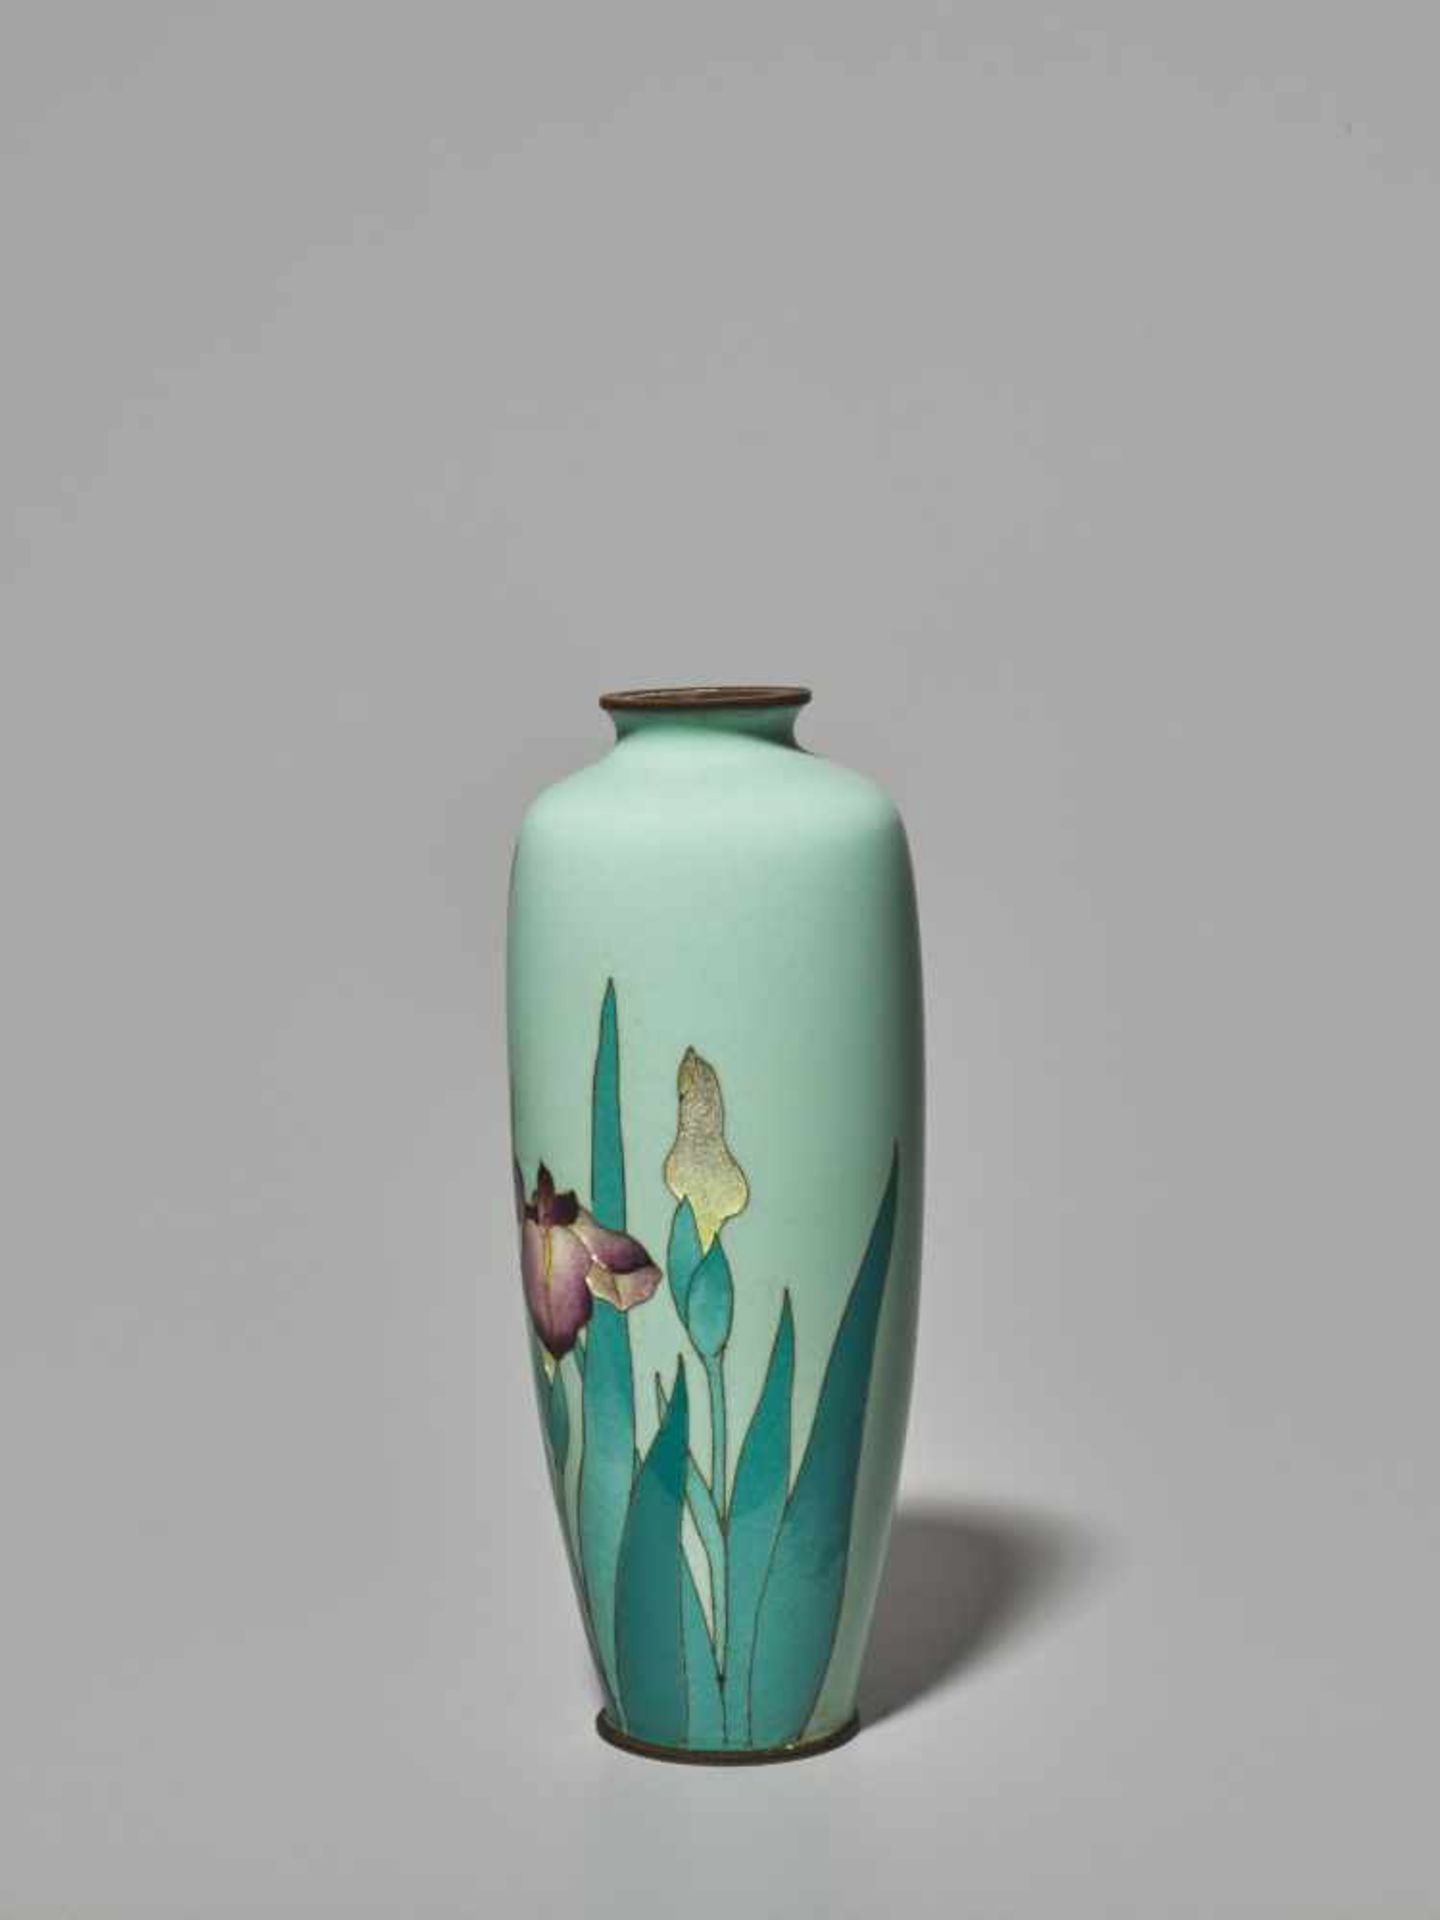 A PAIR OF JAPANESE CLOISONNÉ ENAMEL IRIS VASES WITH GINBARI BLOSSOMS Cloisonné with colored - Image 8 of 13